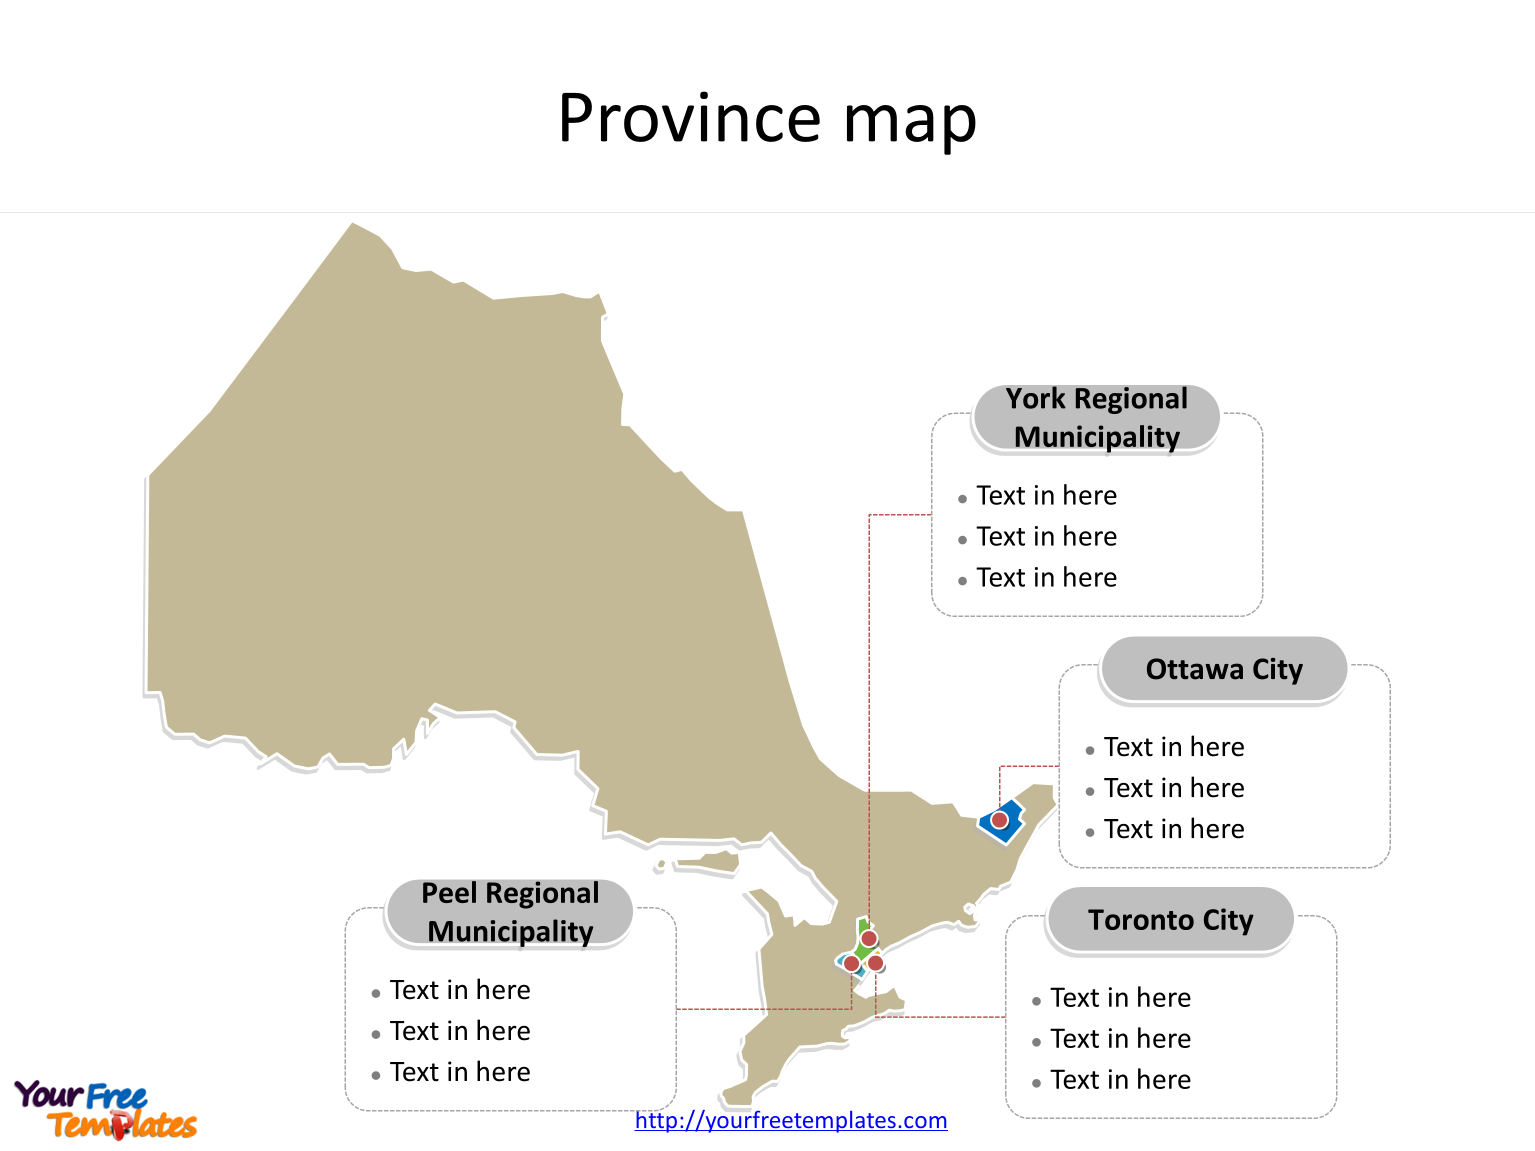 Province of Ontario map with most populated census divisions labeled on the Ontario maps PowerPoint templates